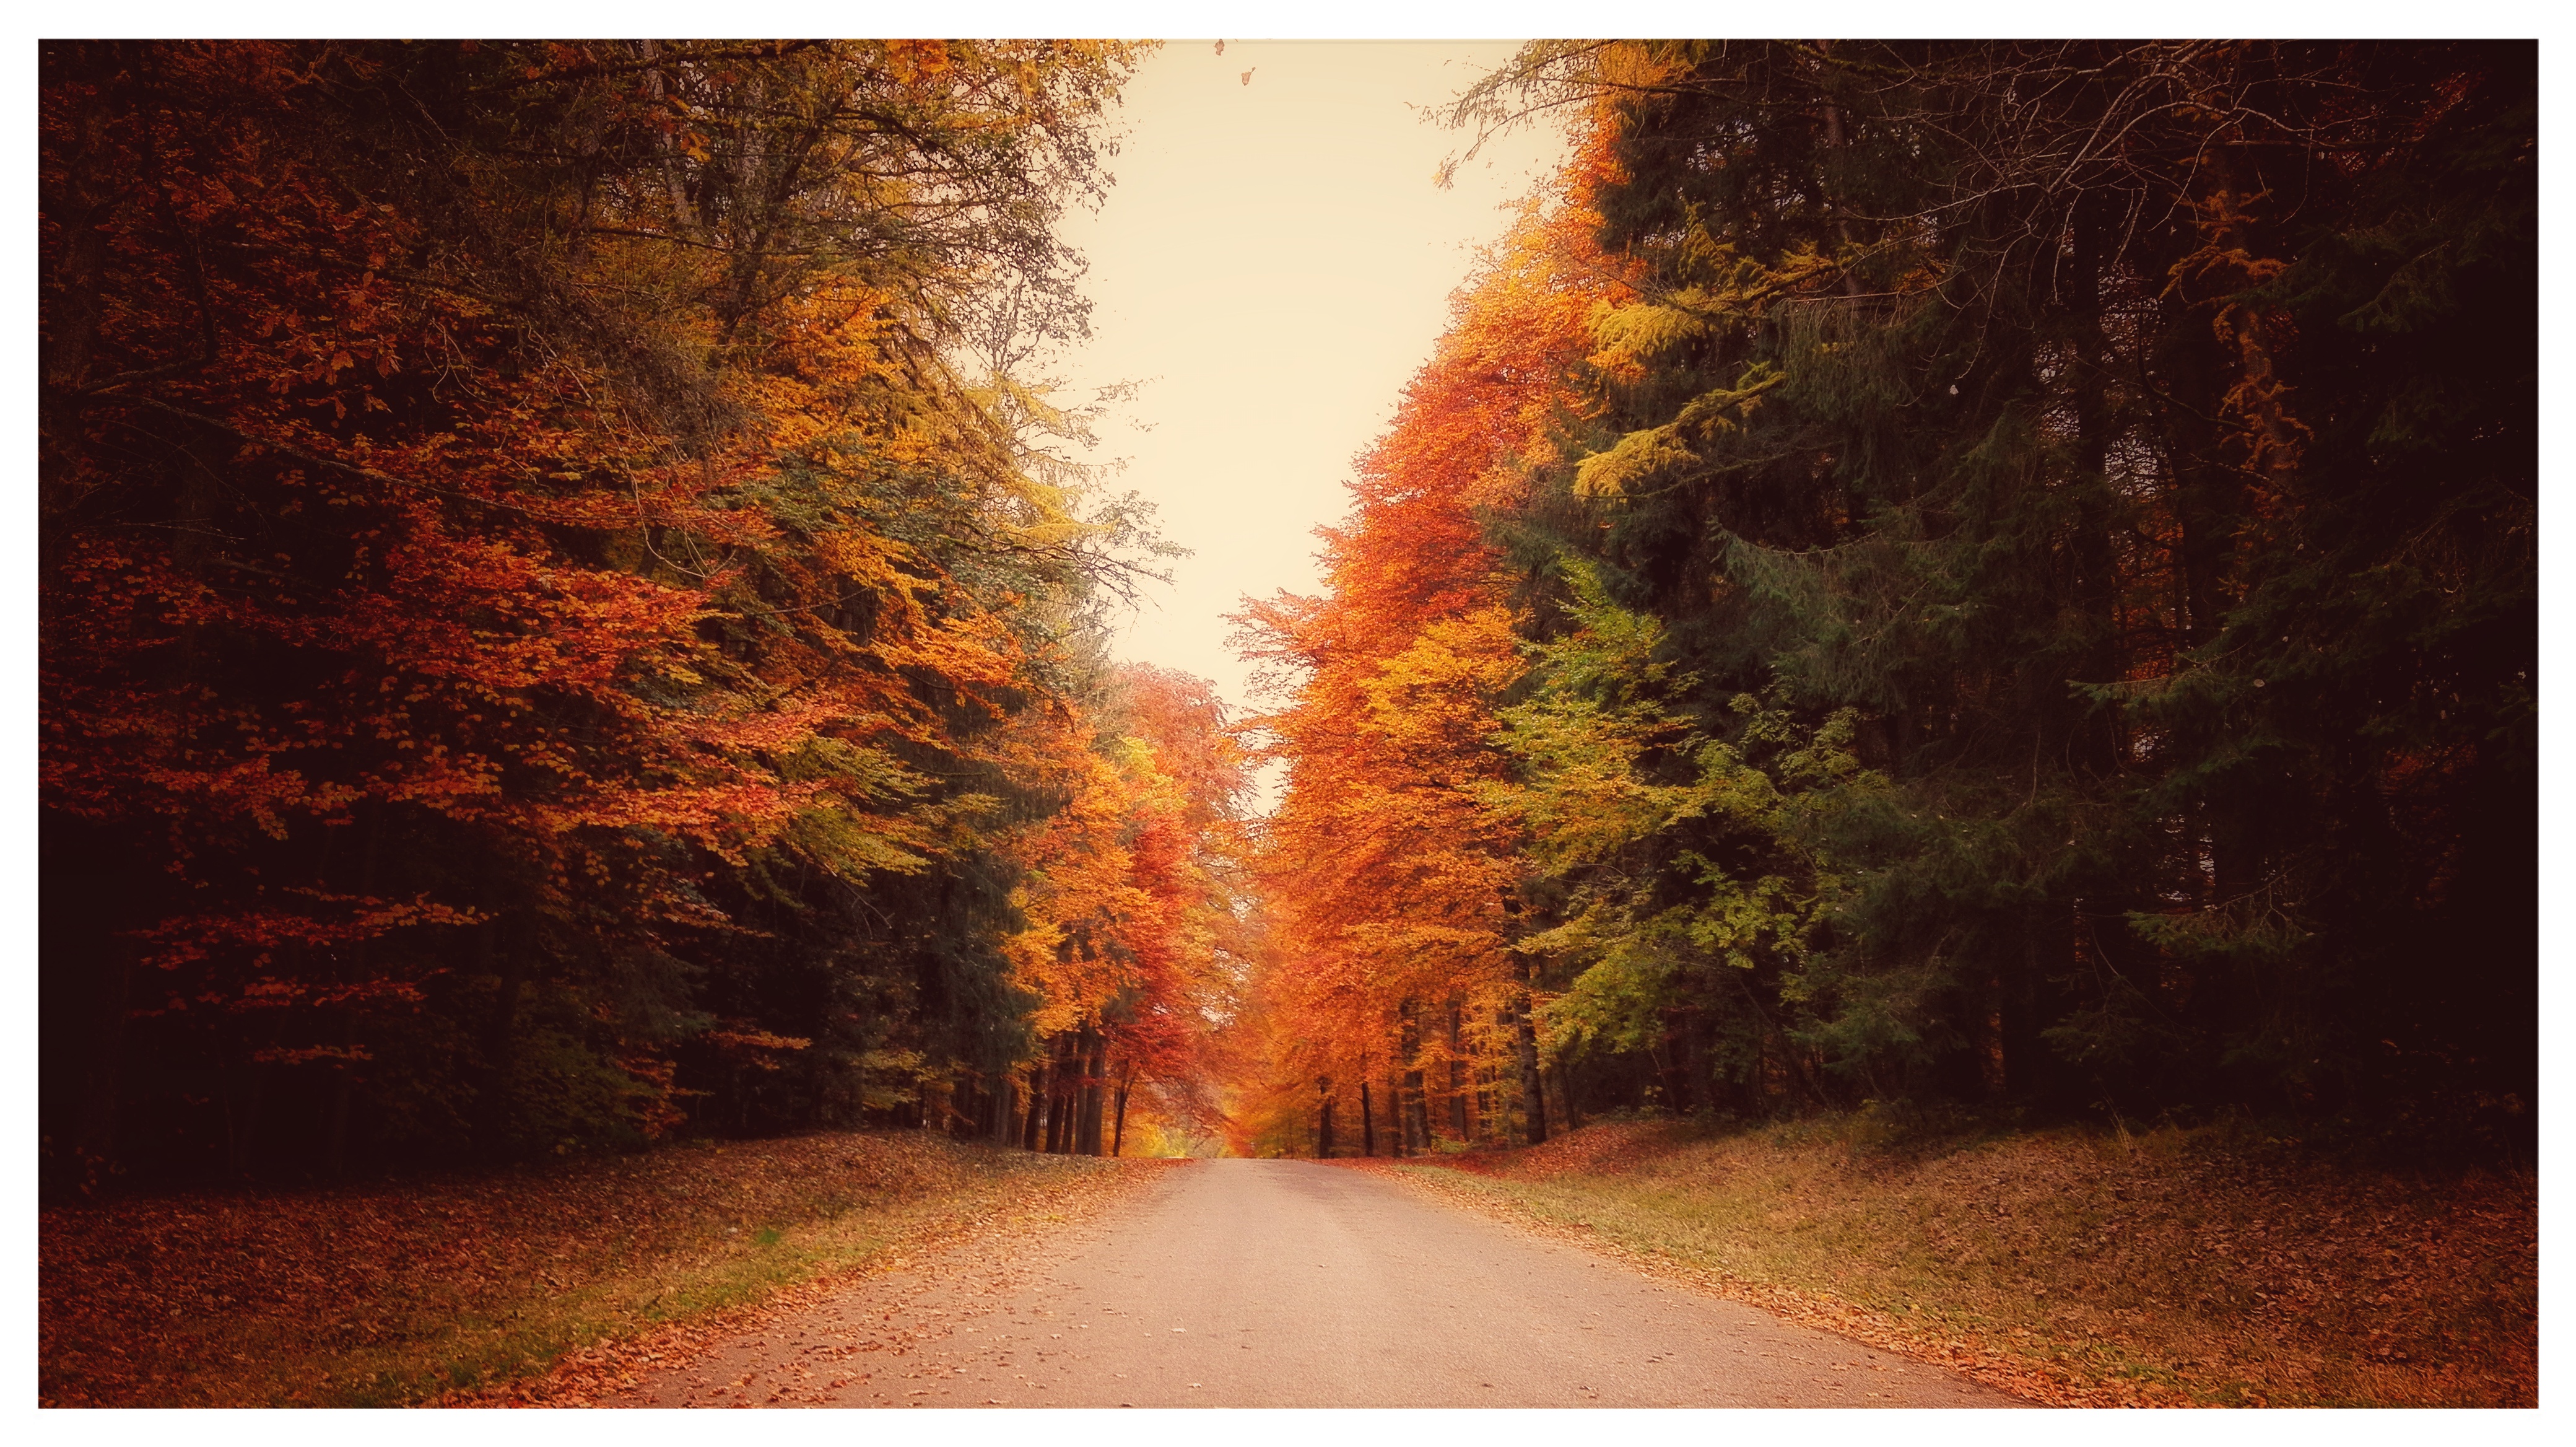 “I'm so glad I live in a world where there are Octobers.”